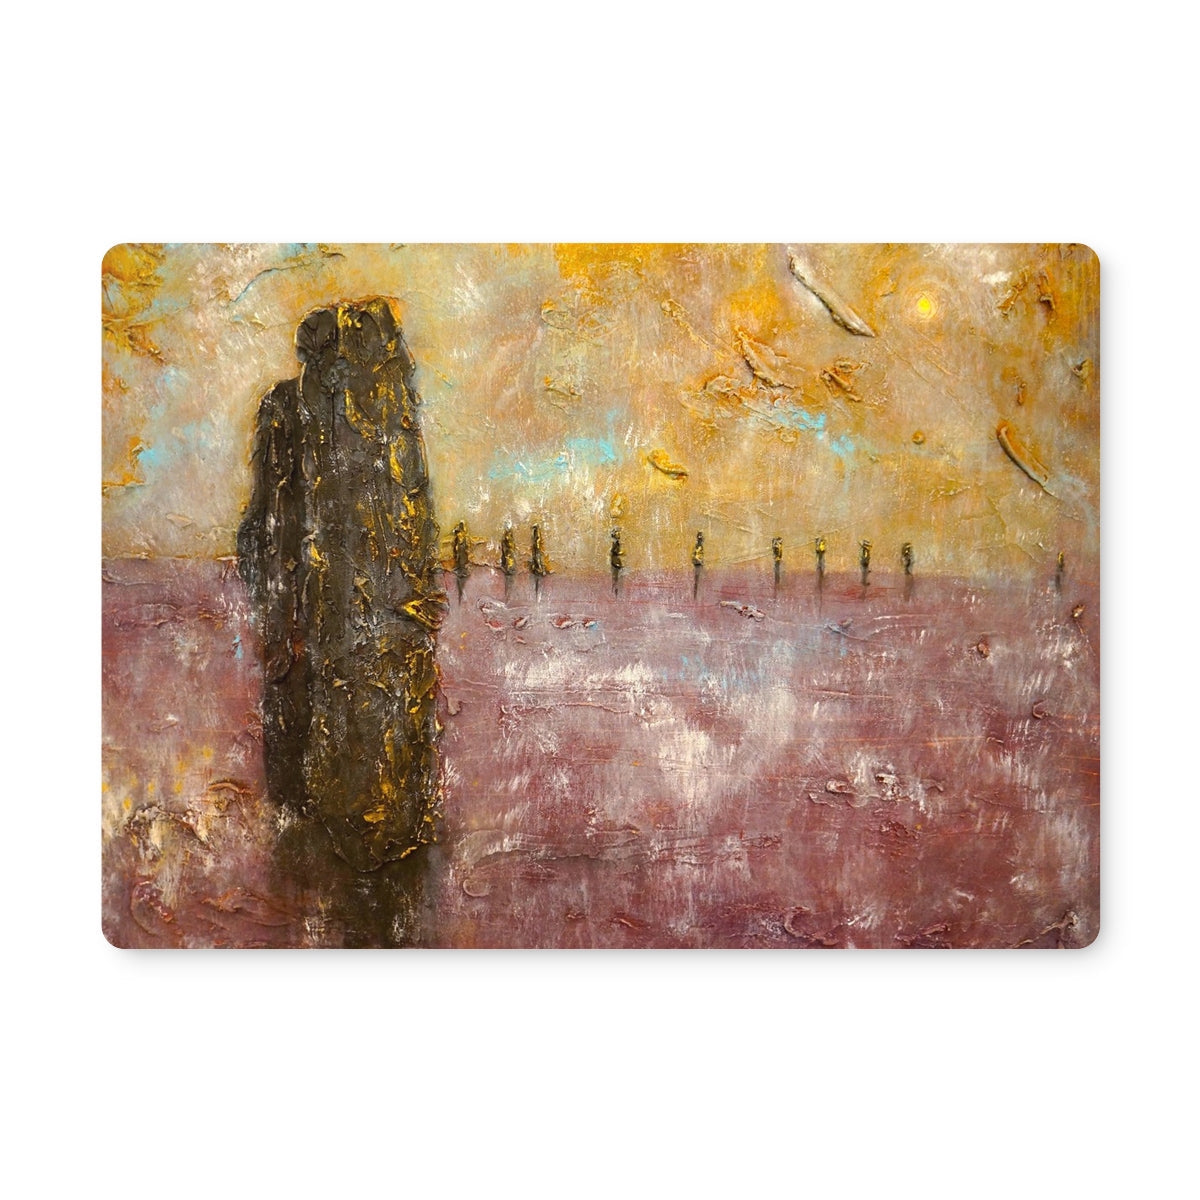 Brodgar Mist Orkney Art Gifts Placemat-Placemats-Orkney Art Gallery-2 Placemats-Paintings, Prints, Homeware, Art Gifts From Scotland By Scottish Artist Kevin Hunter